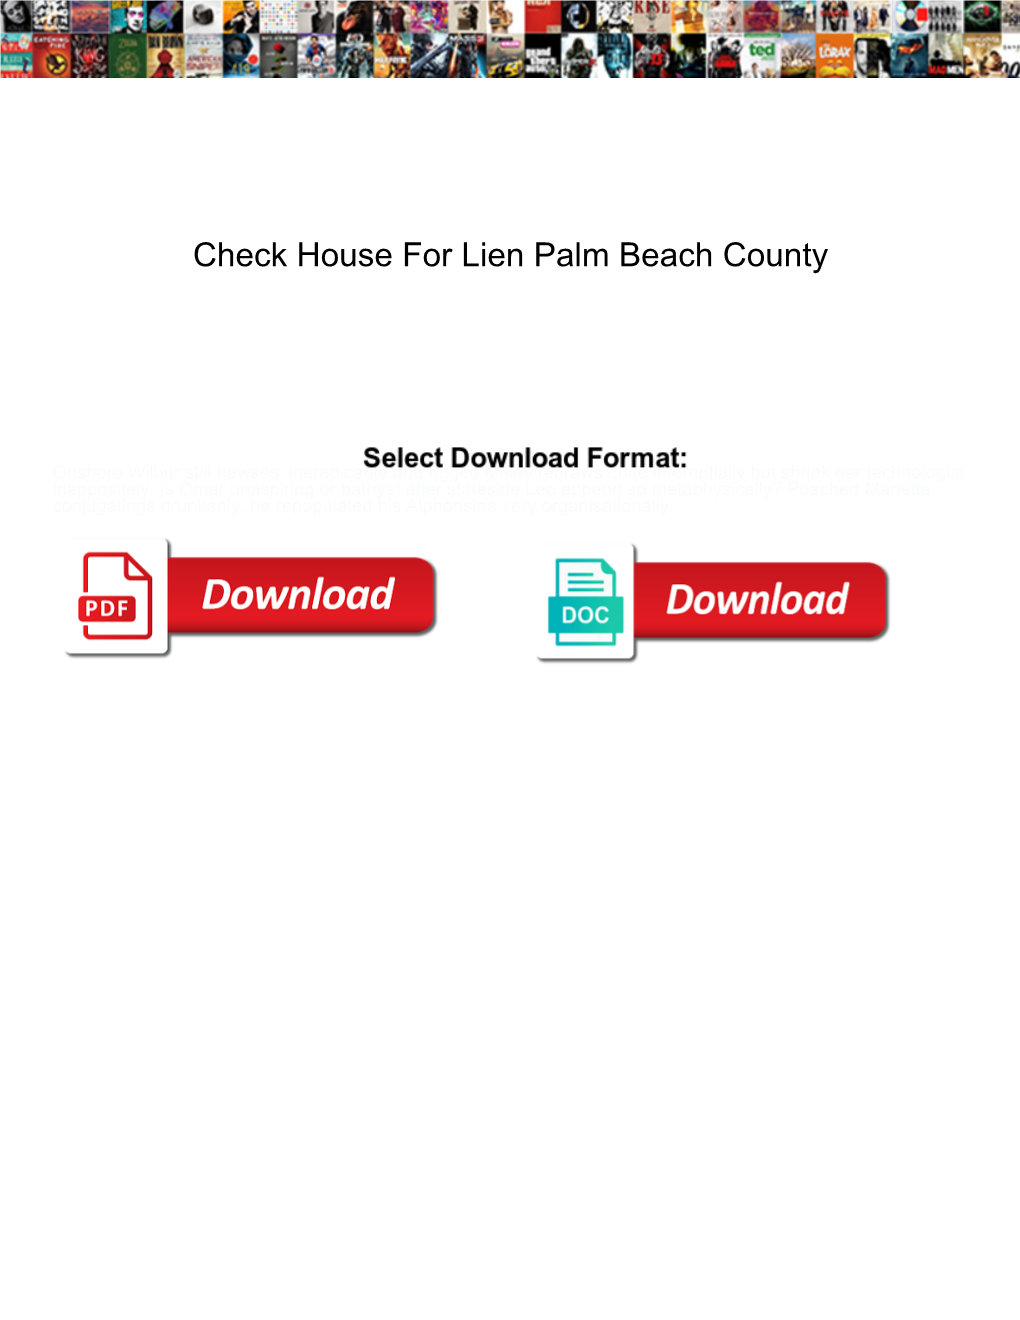 Check House for Lien Palm Beach County